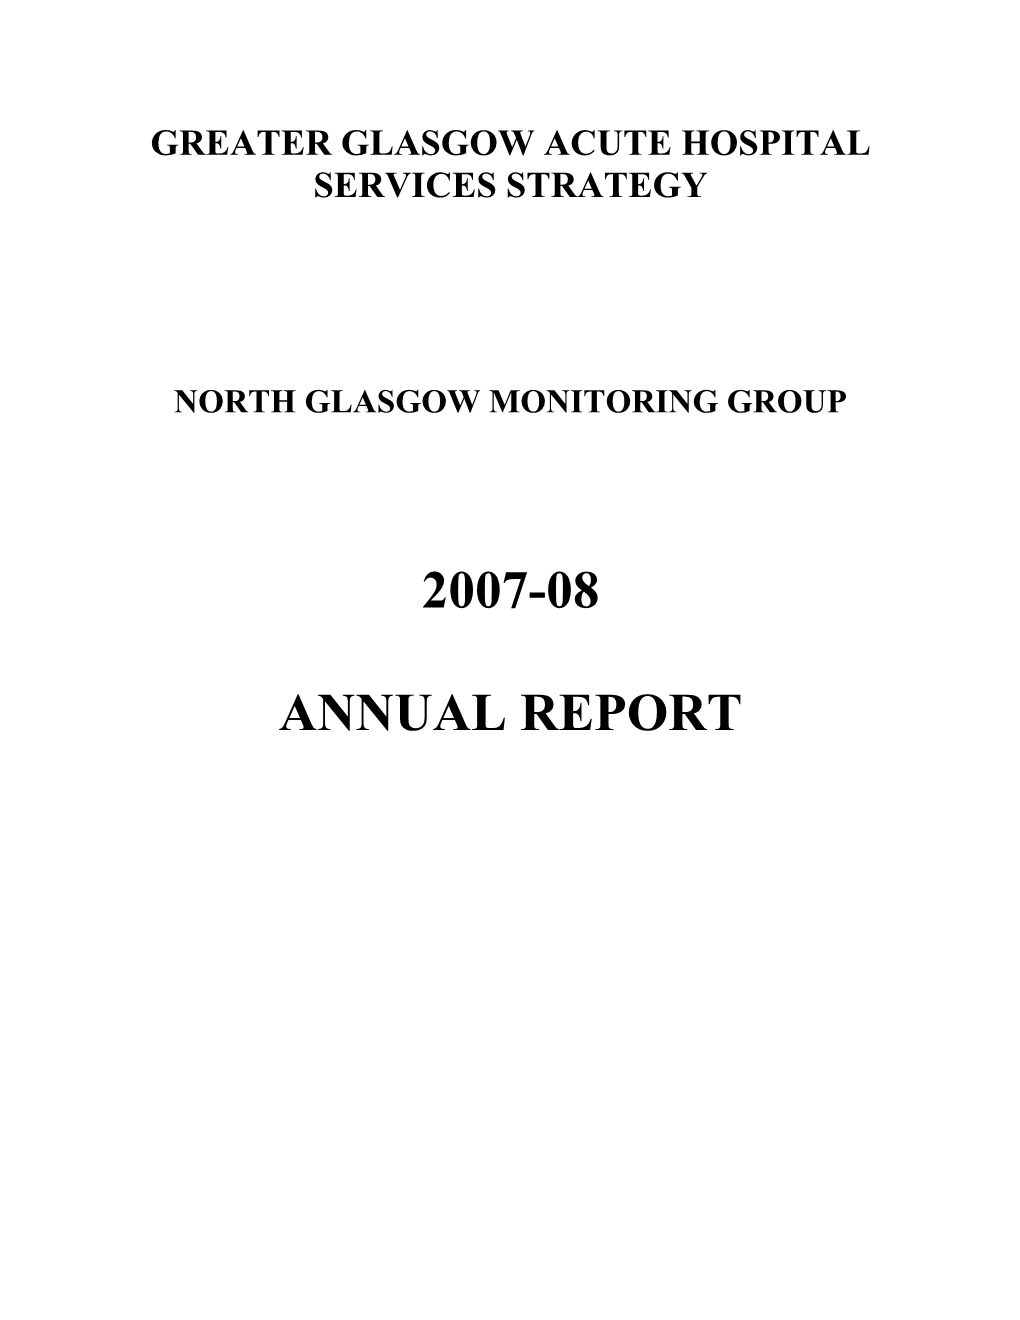 Acute Services Monitoring Group Annual Report 2007-08